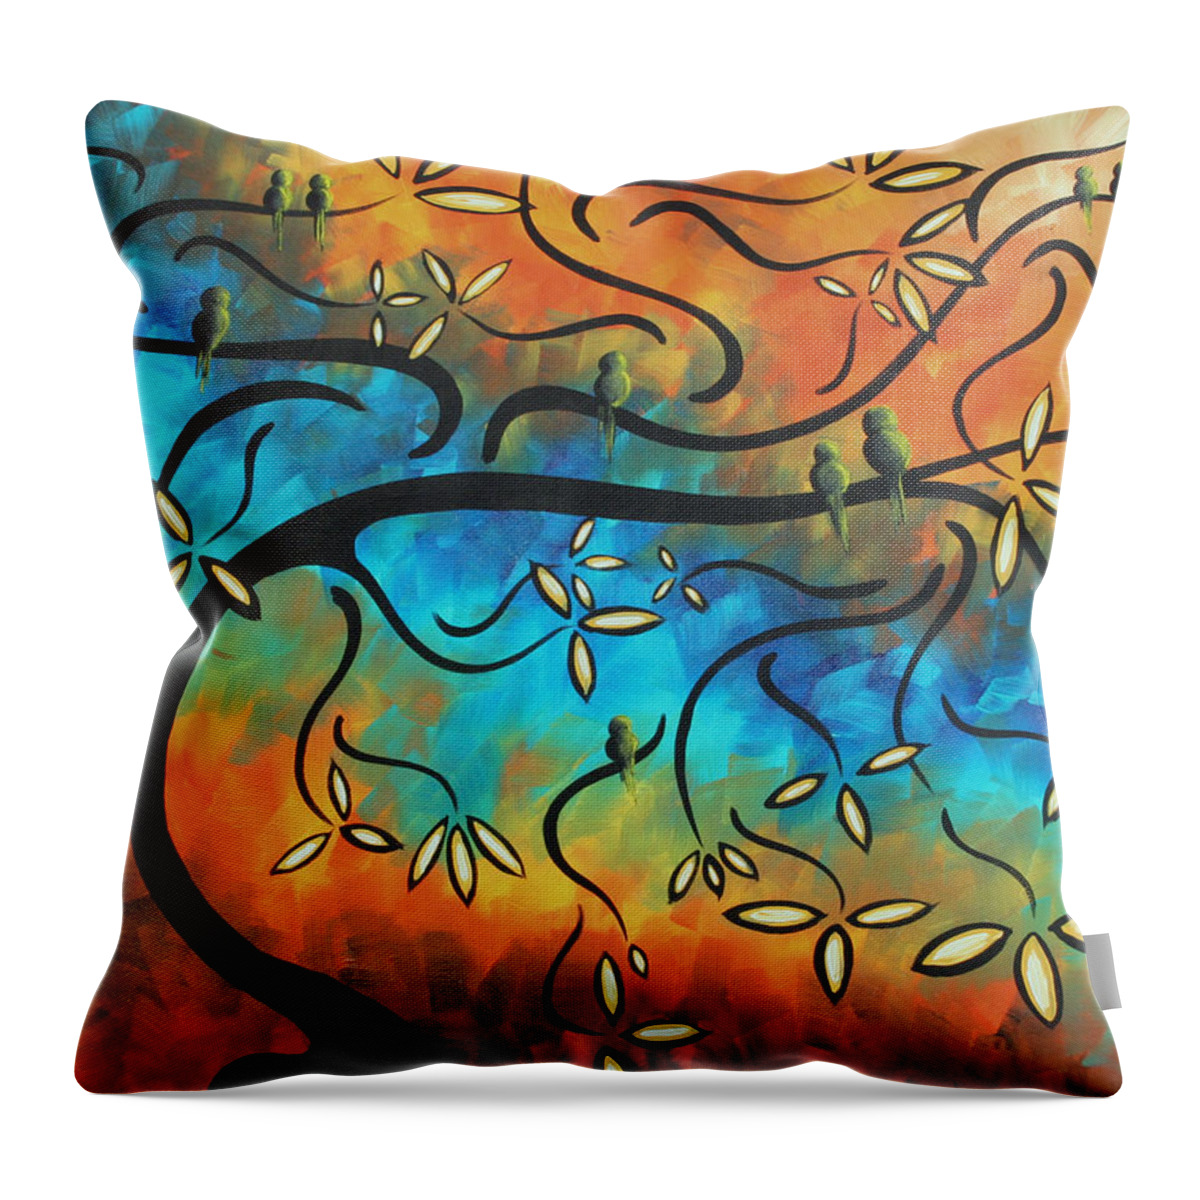 Abstract Throw Pillow featuring the painting Abstract Bird Painting Original Art MADART Tree House by Megan Aroon